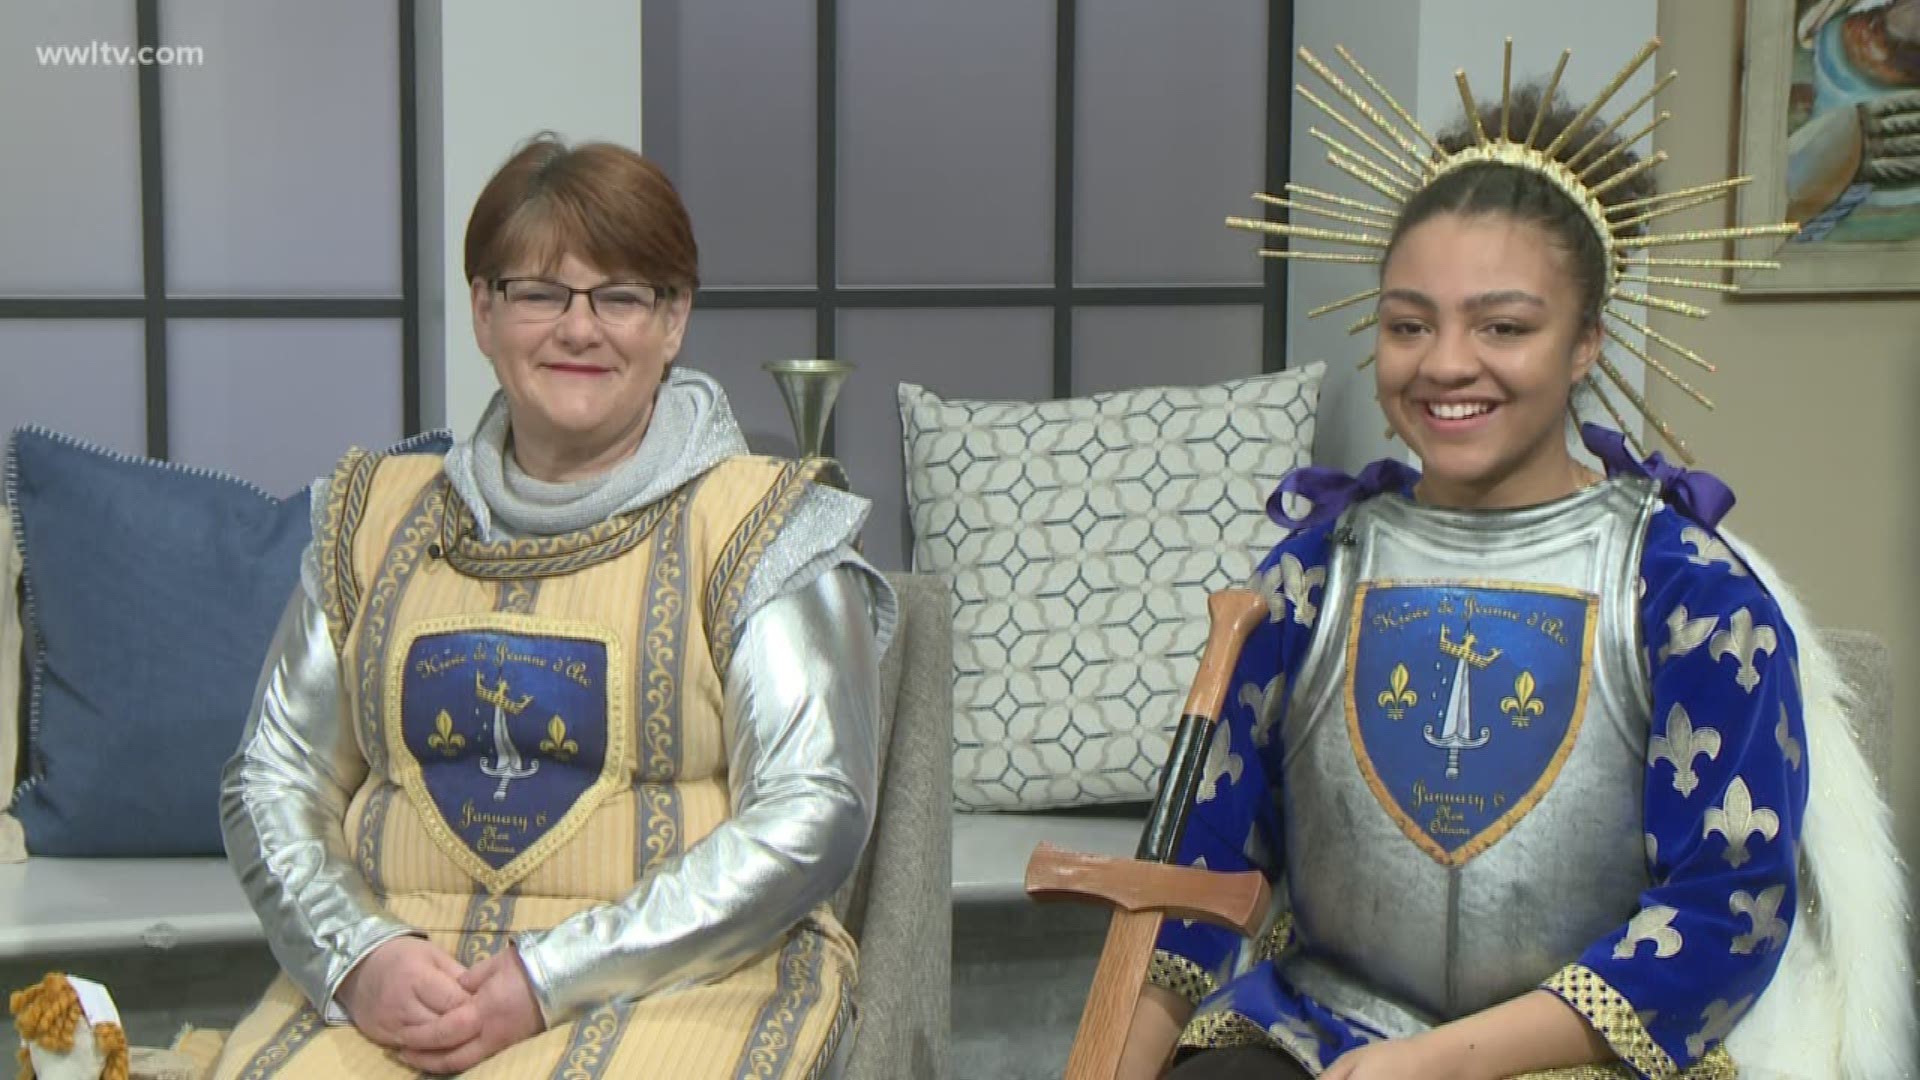 We are sitting down with this years elected Joan of Arc Zoe Kanga and Krewe Captain Antoinette De Alteriis ahead of their roll on the first night of carnival.